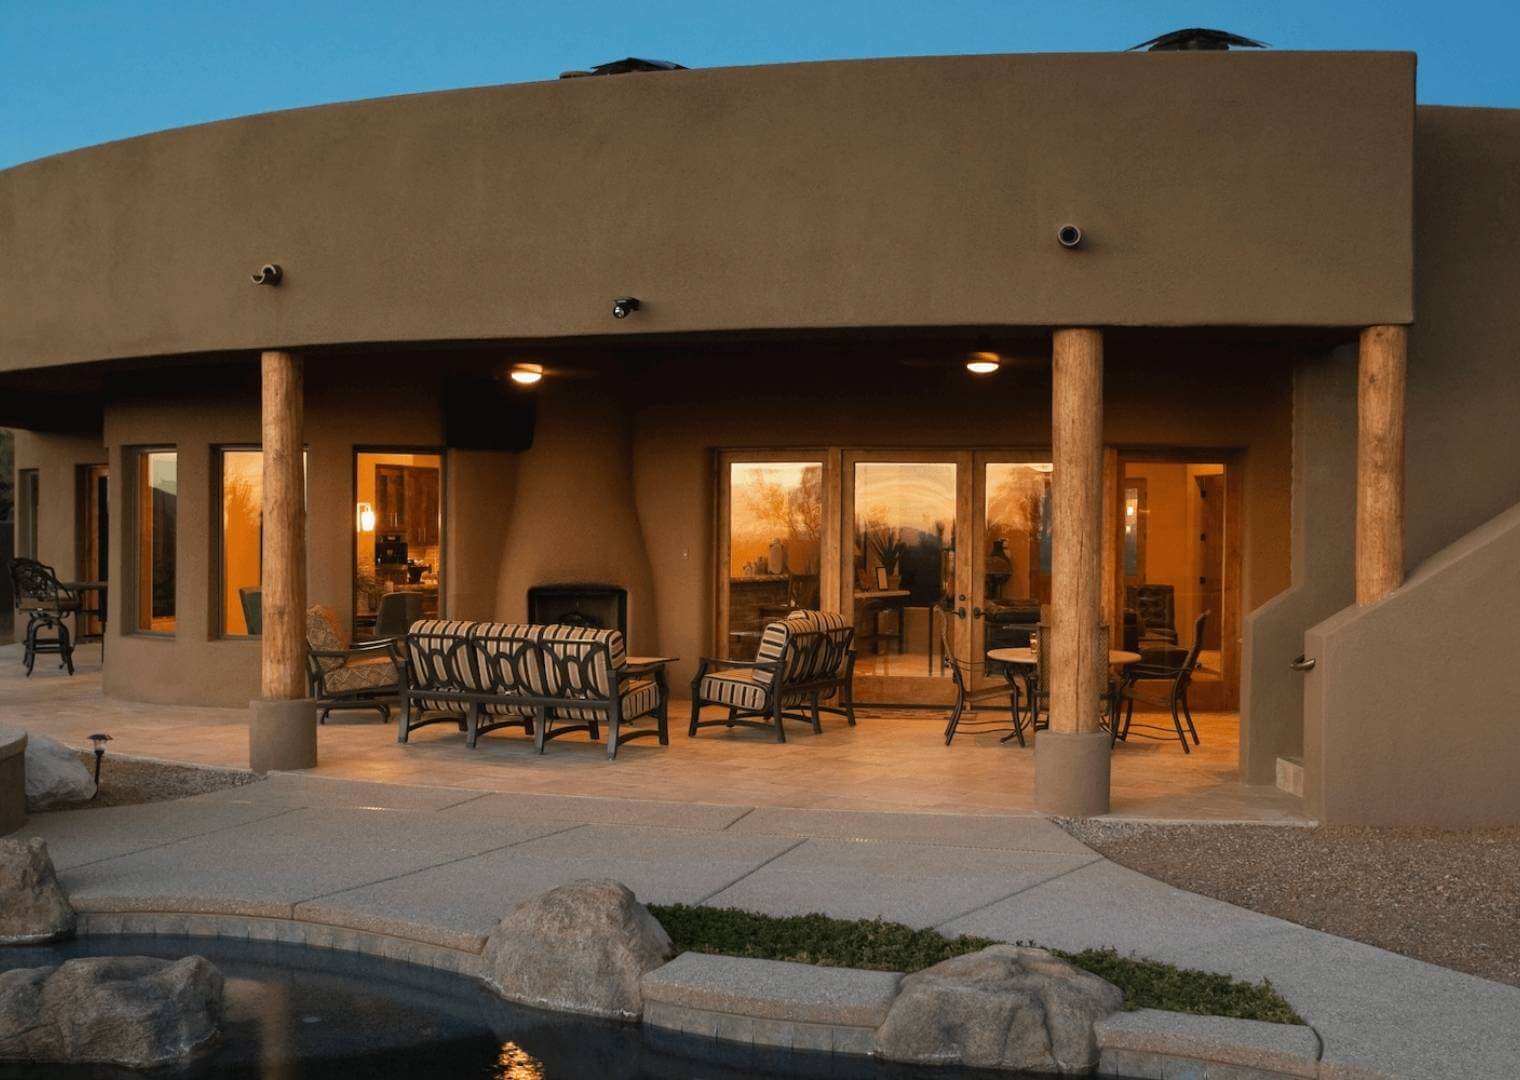 Newer Pueblo Revival homes in Arizona often have an exterior with historic styling and an interior with a modern ranch layout.